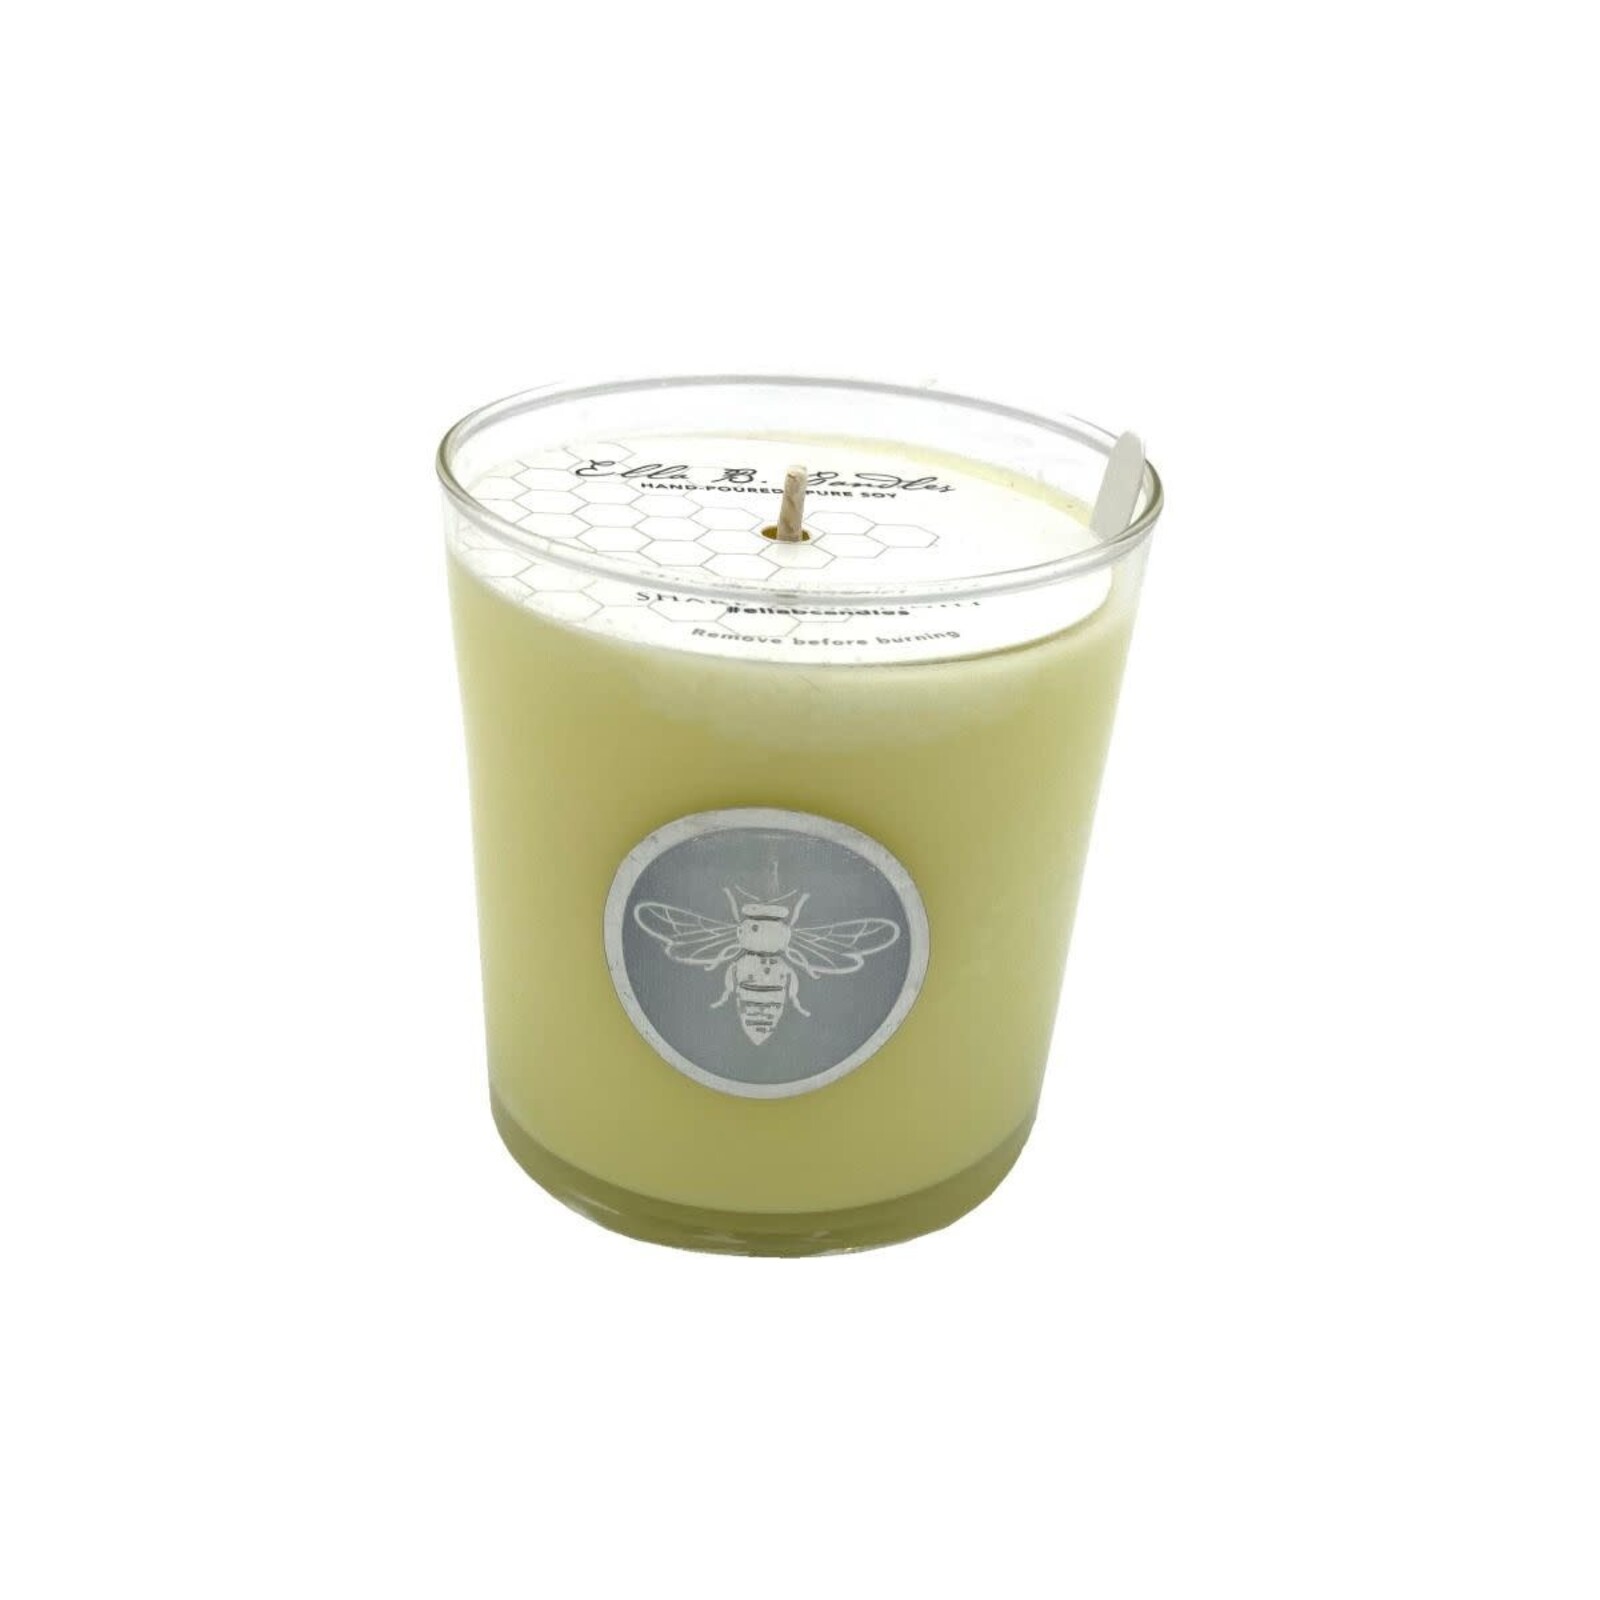 Ella B Candles Hand Poured Soy Candle-Prosperity loading=